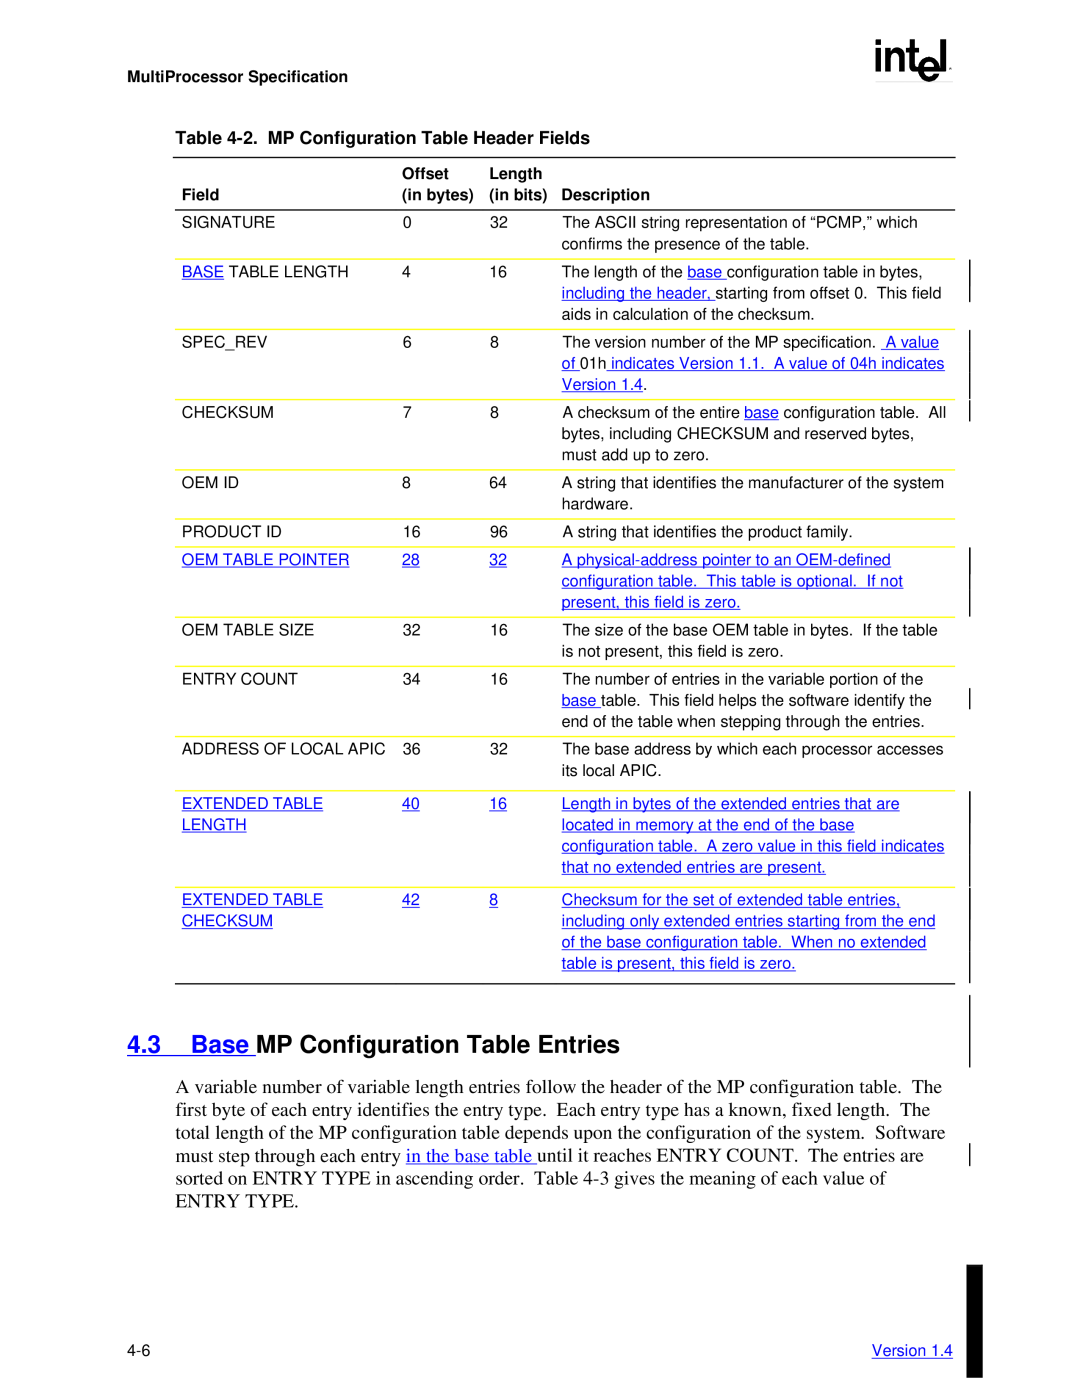 Intel MultiProcessor manual 4.3BaseMP Configuration Table Entries, Entry Type 